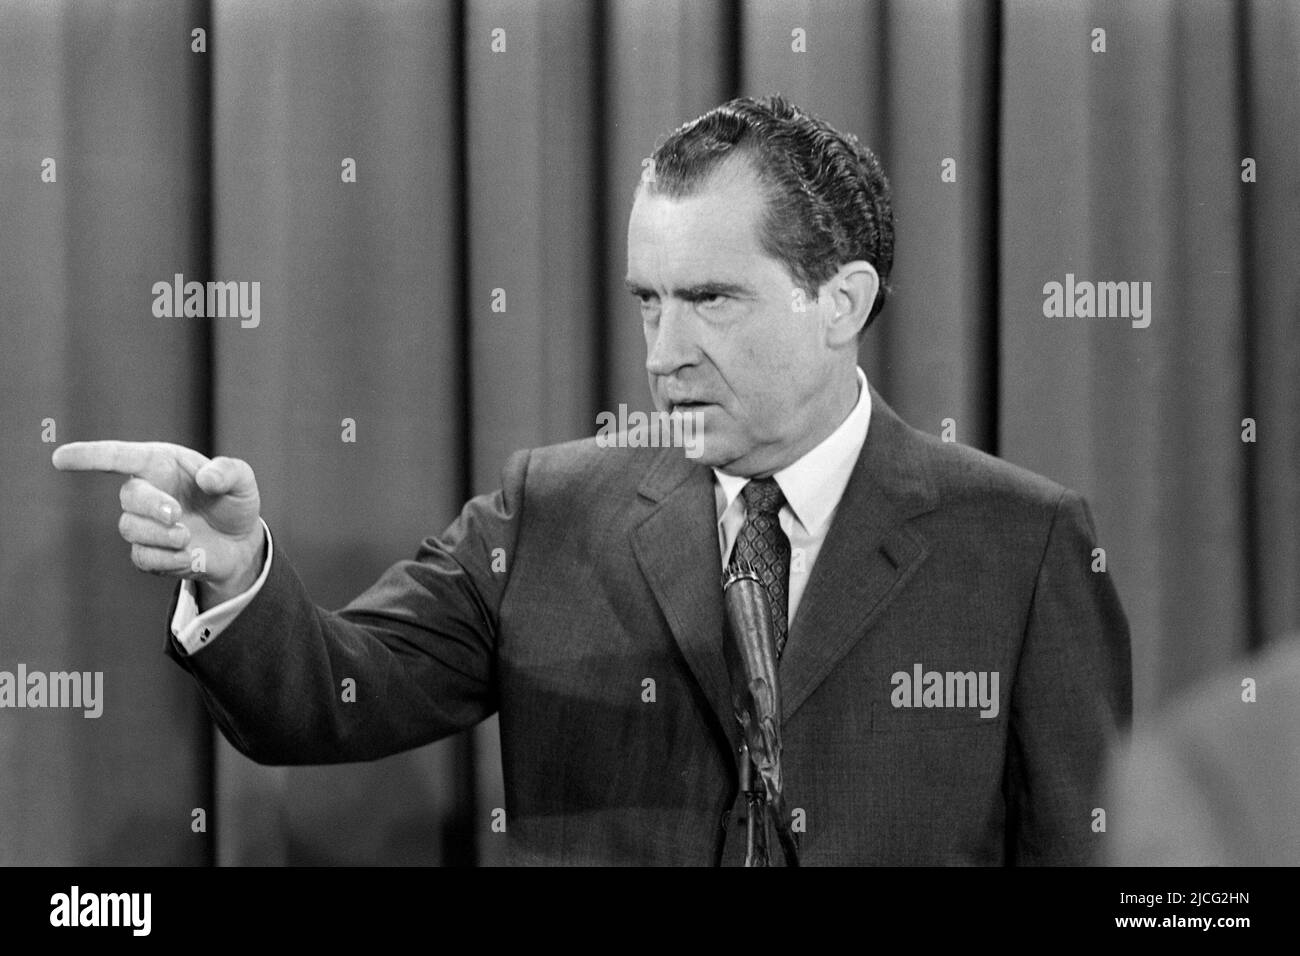 US President Richard NIXON, speaks at the lectern, gesture, Richard Milhous NIXON (born January 9, 1913 in Yorba Linda, California; åÊ April 22, 1994 in New York City, New York) was an American Republican Party politician and 37th President of the United States from 1969 to 1974. Nixon is the only President of the United States to have resigned from office; The reason for this was the Watergate affair, undated black and white photo, around 1974. Stock Photo